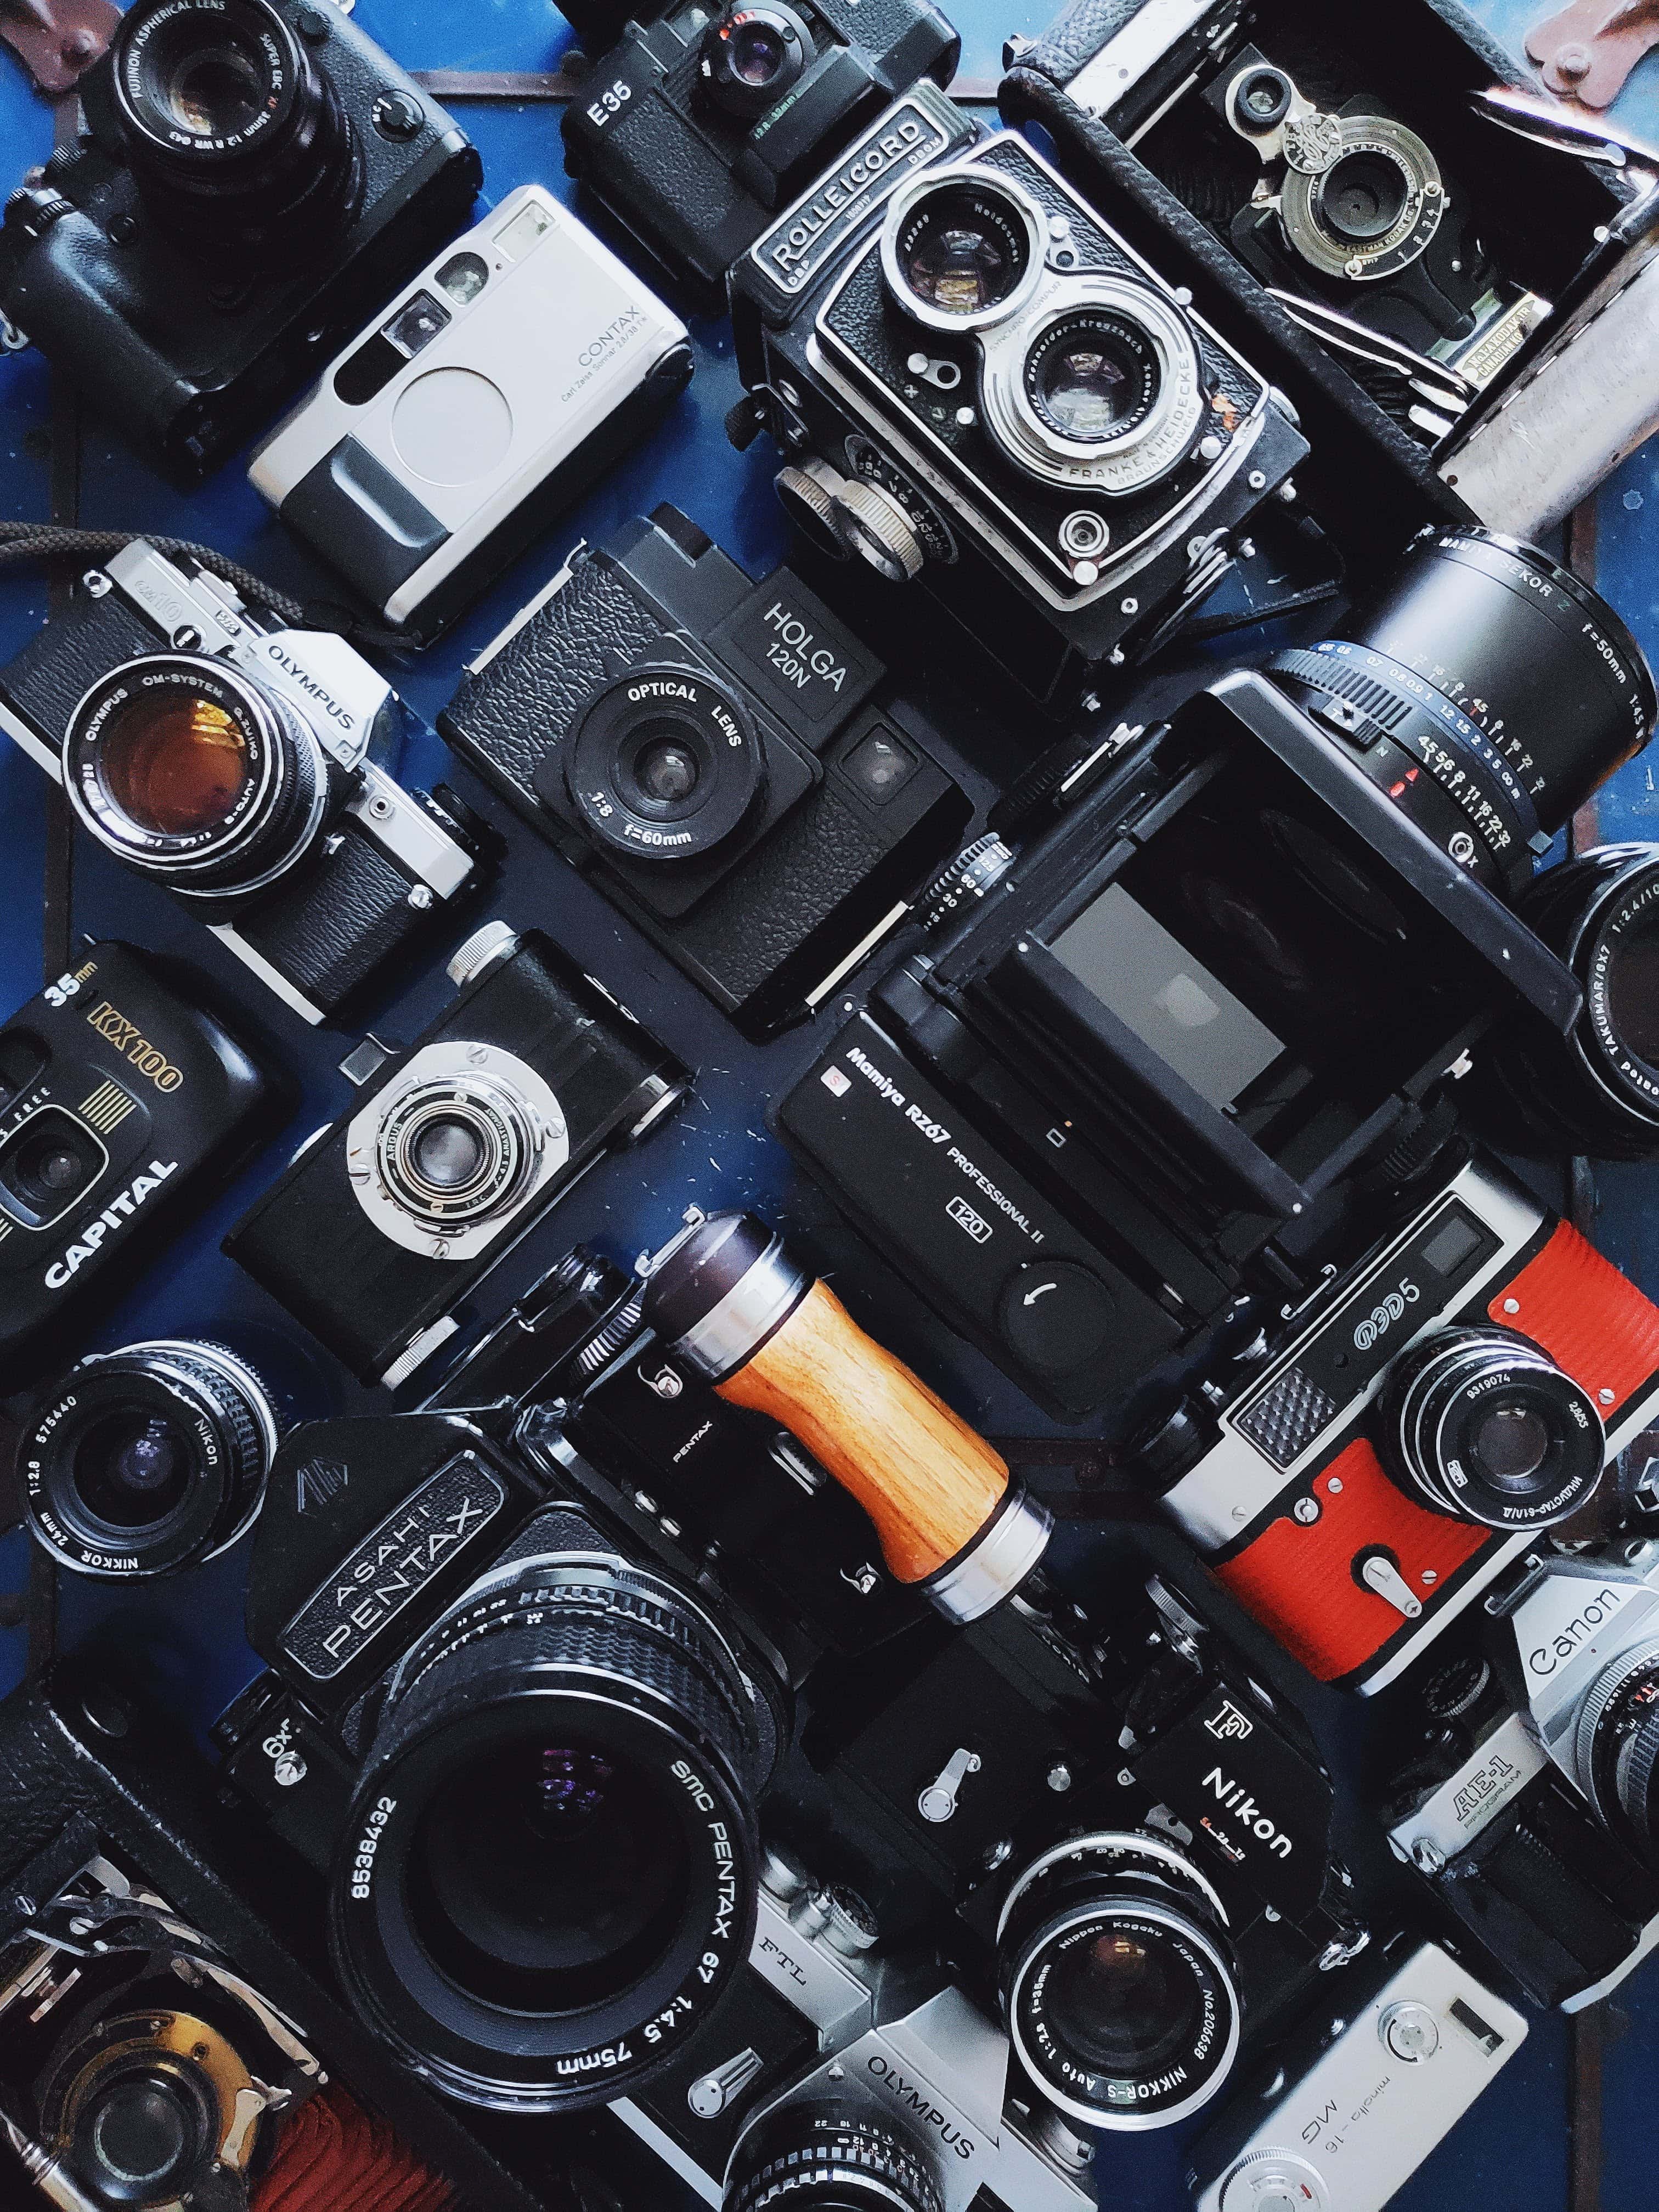 Filmmaking Trends in 2020 - An Image of Many Cameras